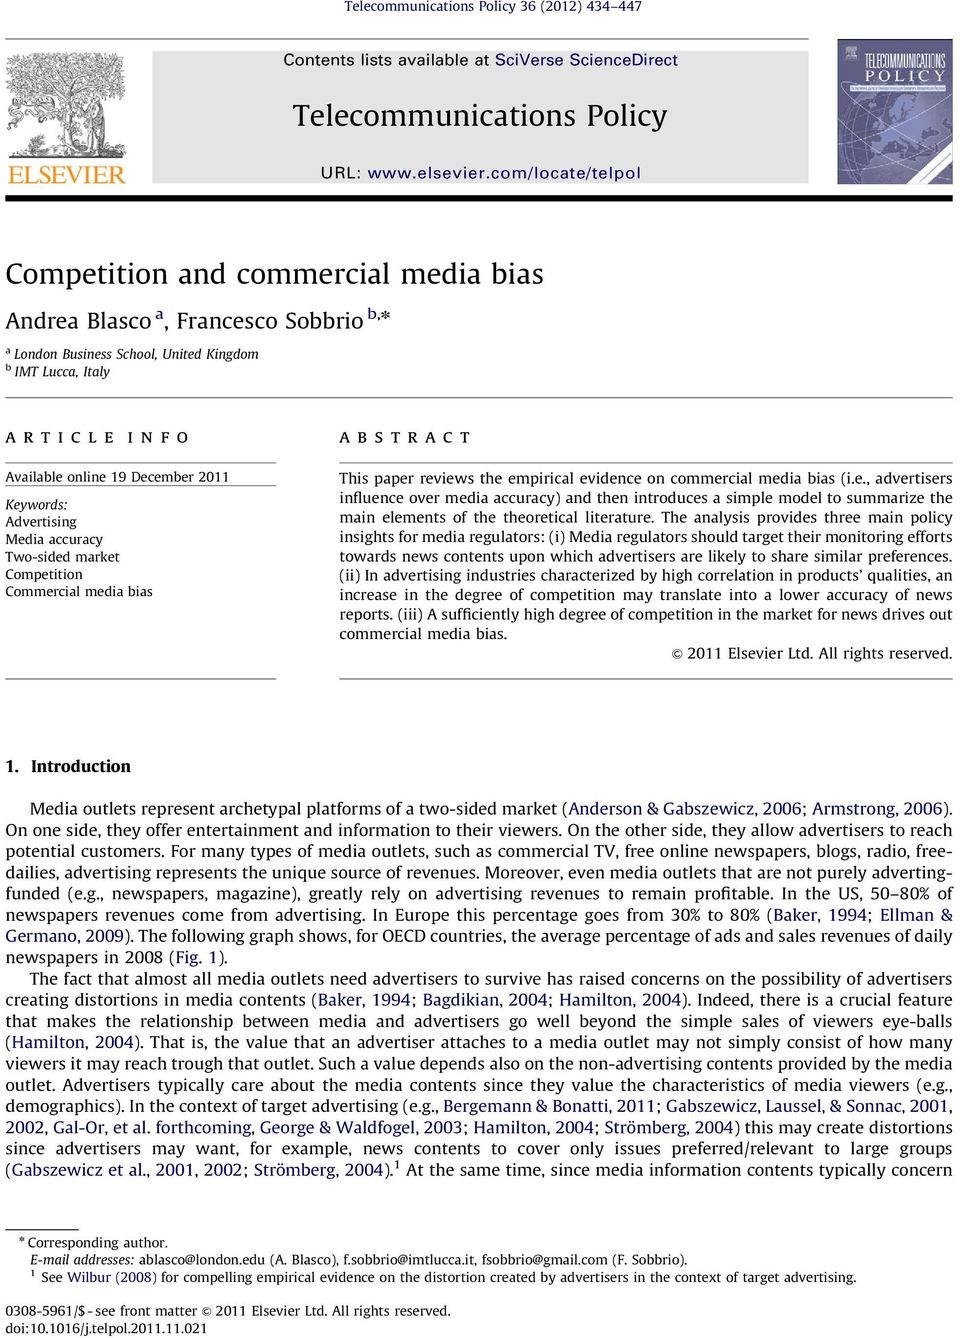 2011 Keywords: Advertising Media accuracy Two-sided market Competition Commercial media bias abstract This paper reviews the empirical evidence on commercial media bias (i.e., advertisers influence over media accuracy) and then introduces a simple model to summarize the main elements of the theoretical literature.